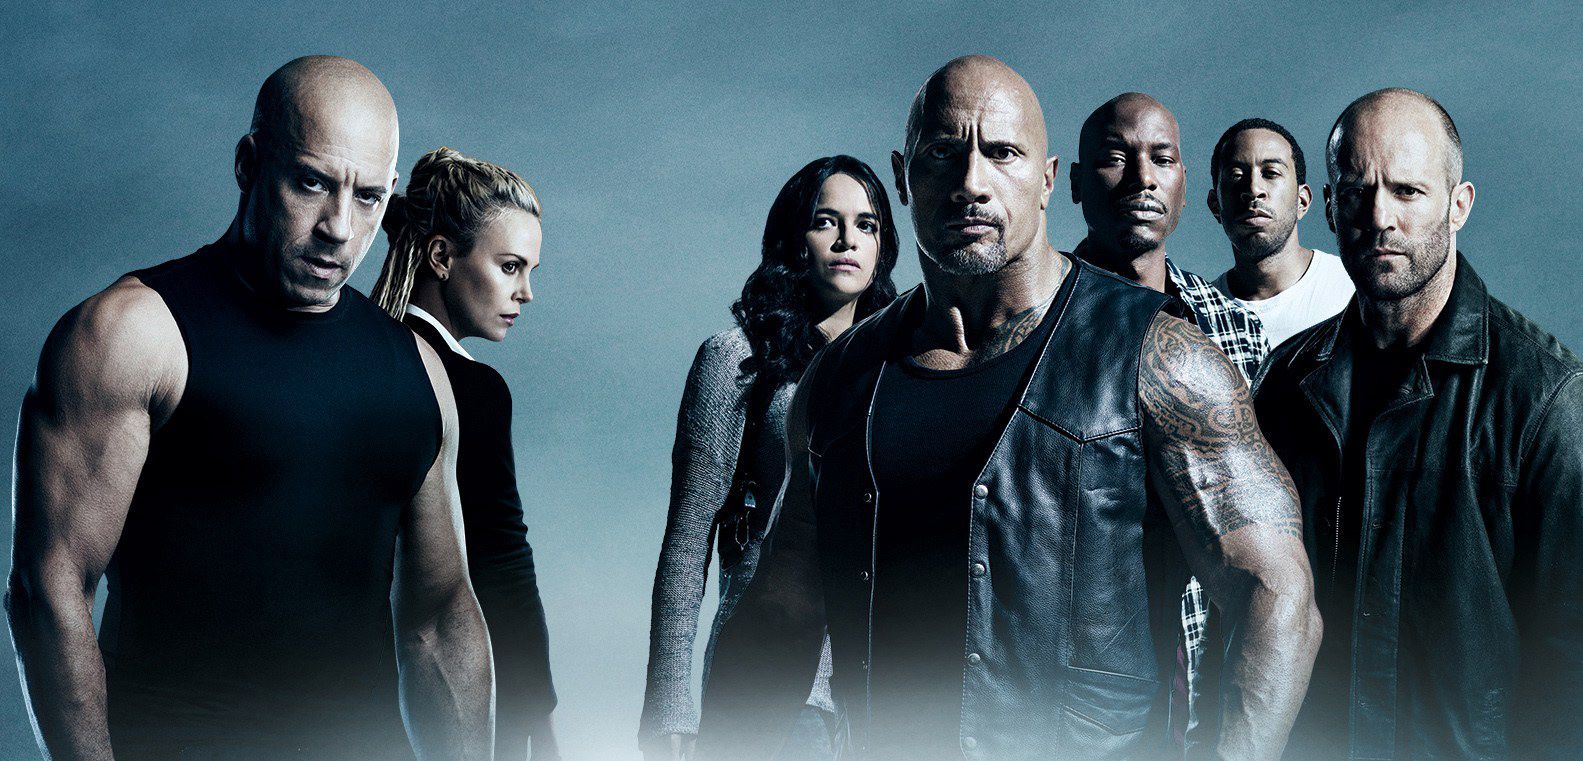 Dwayne Johnson doesn't think he's in Fast & Furious 9